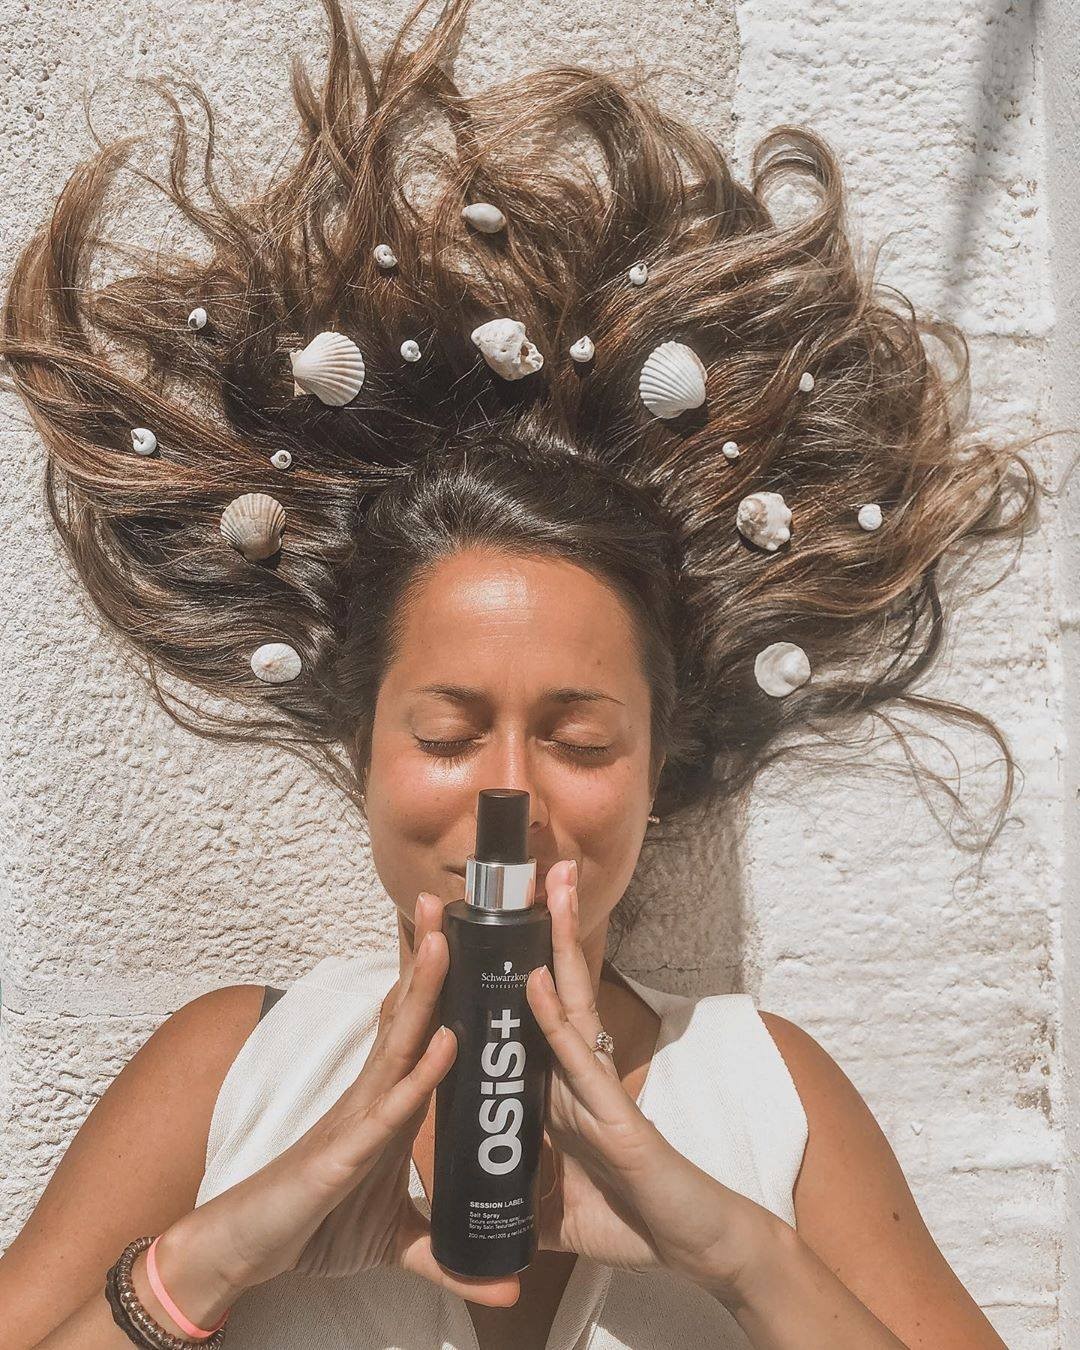 Schwarzkopf Professional - Mermaid Hair in just 5 minutes! 🐚

@thewanderingsenorita’s Pro Tip:
Use #OSiS Session Label Salt Spray – “All you have to do is apply it to either damp or dry hair, twist an...